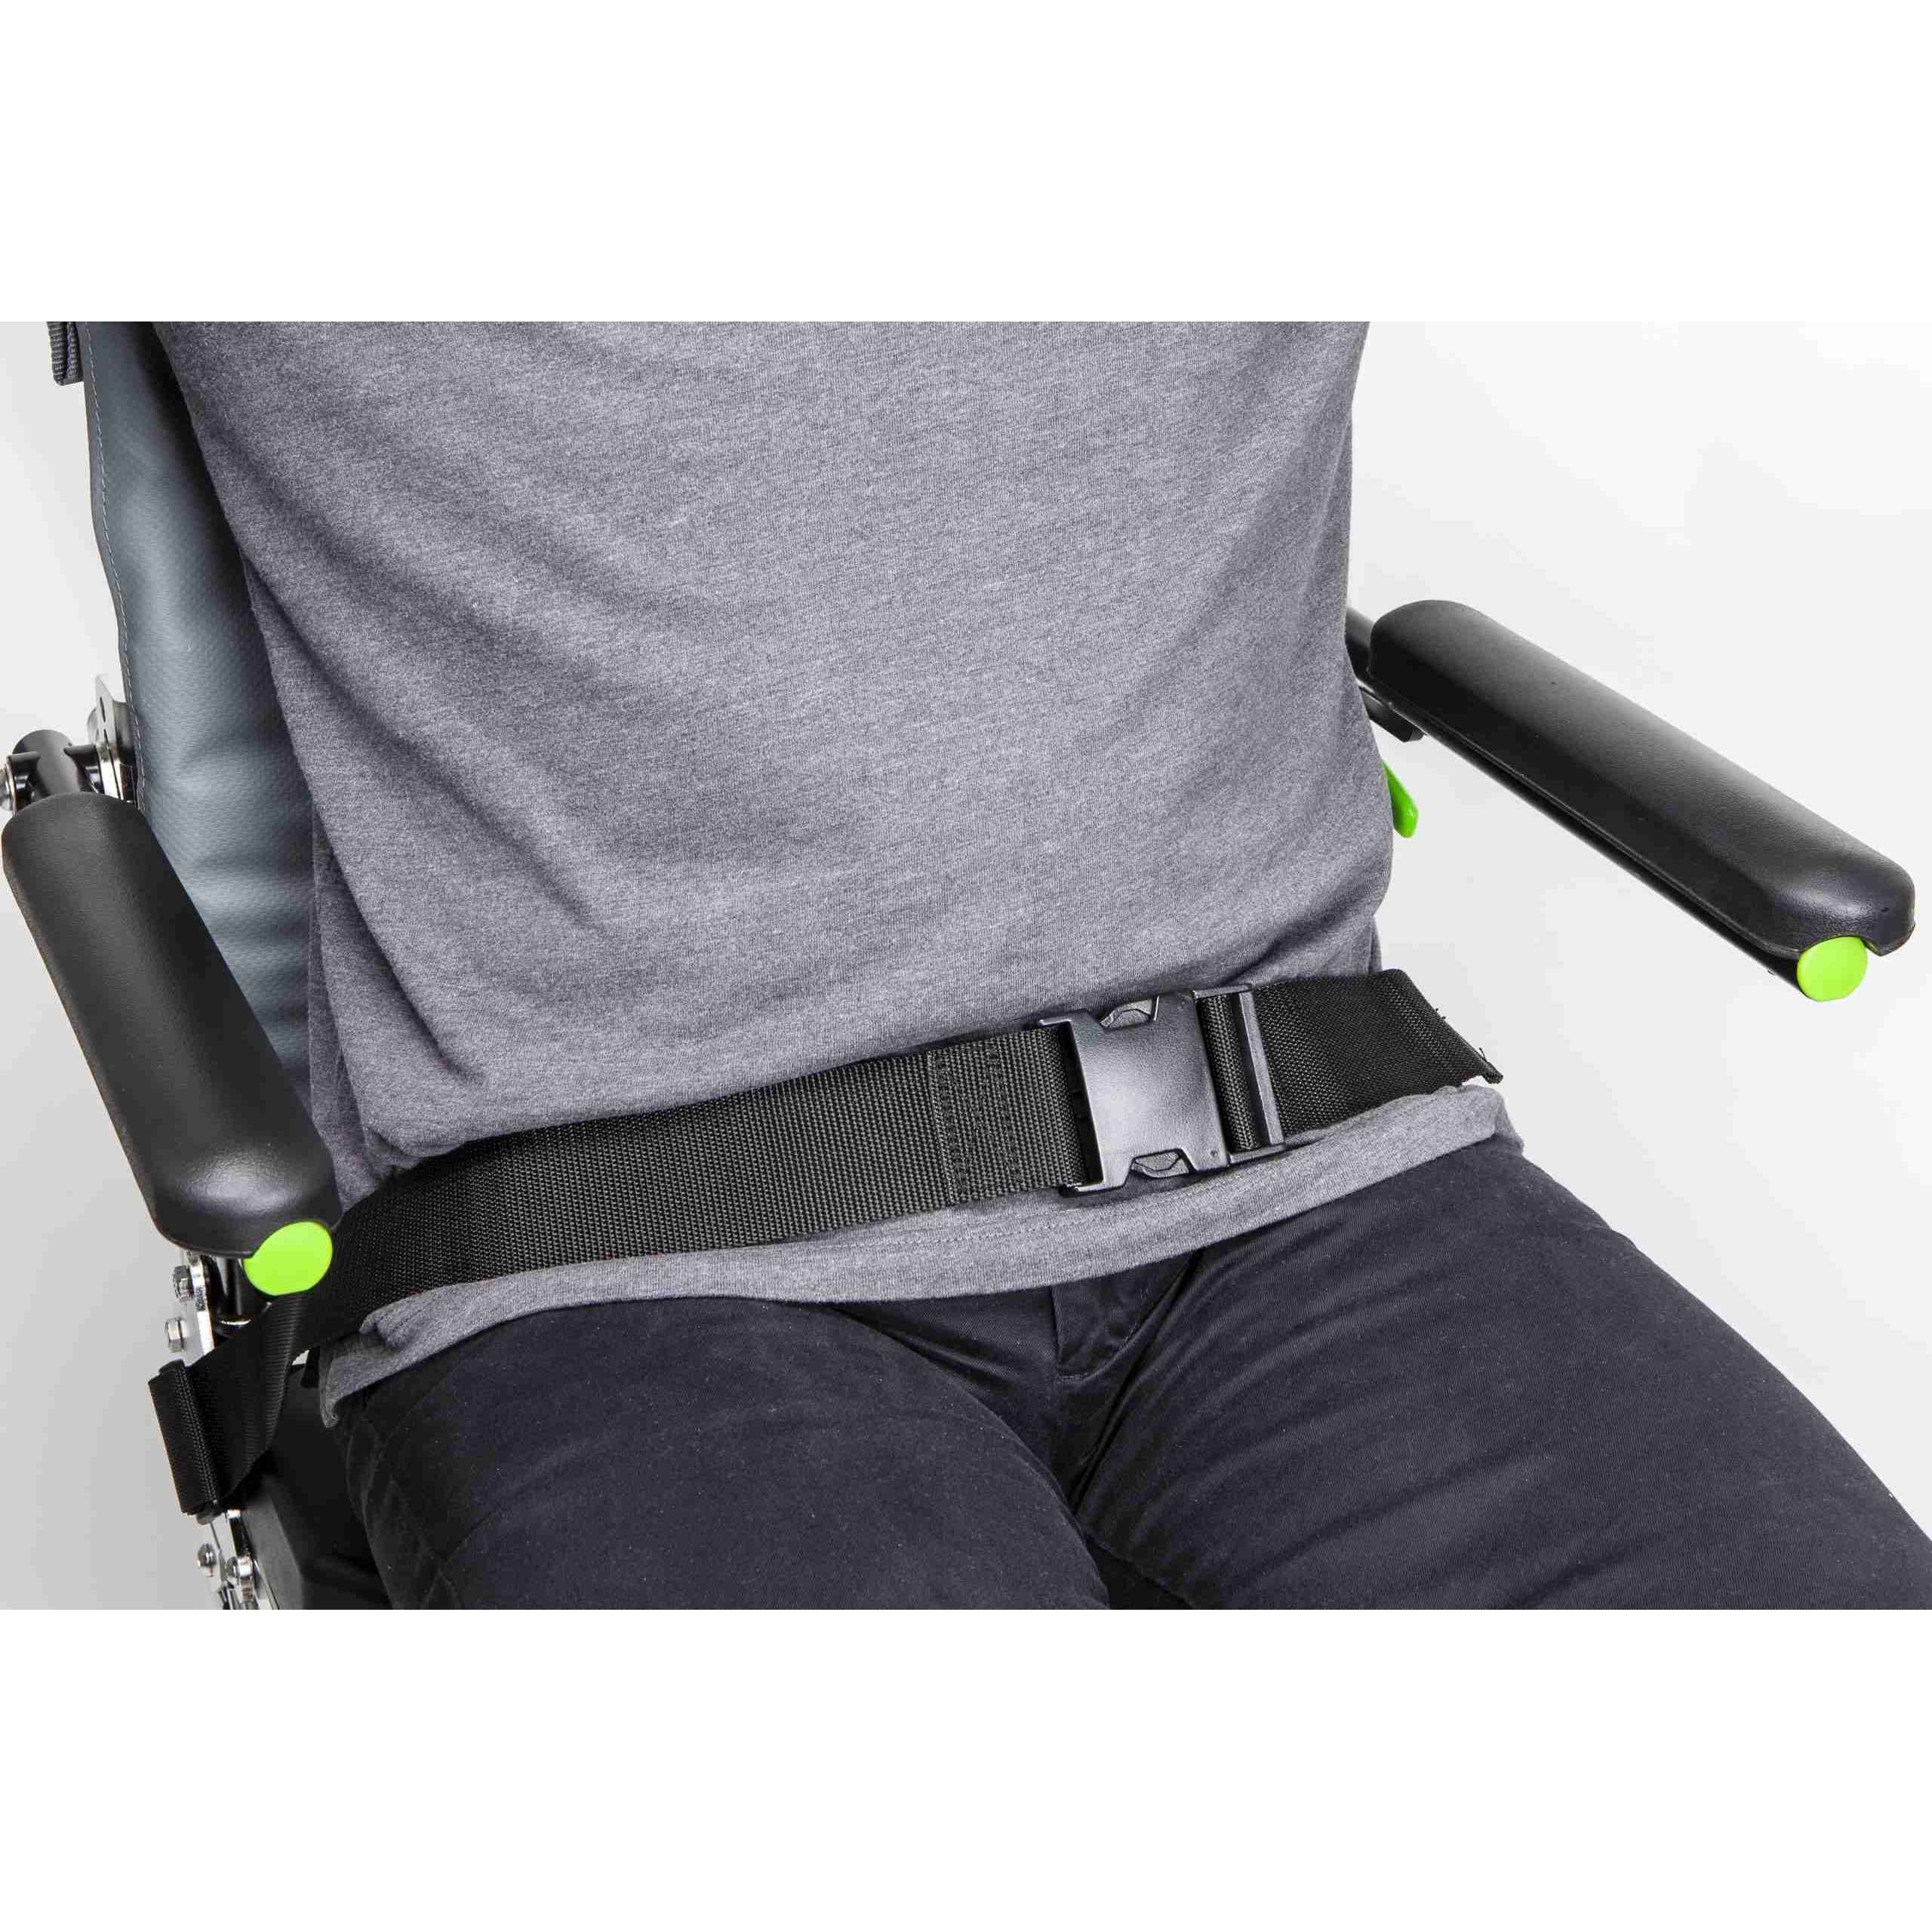 Pelvic Belt - Extra Large (2 piece with side release buckle) (for 22" - 30" seat frame widths) (ZPBXL)